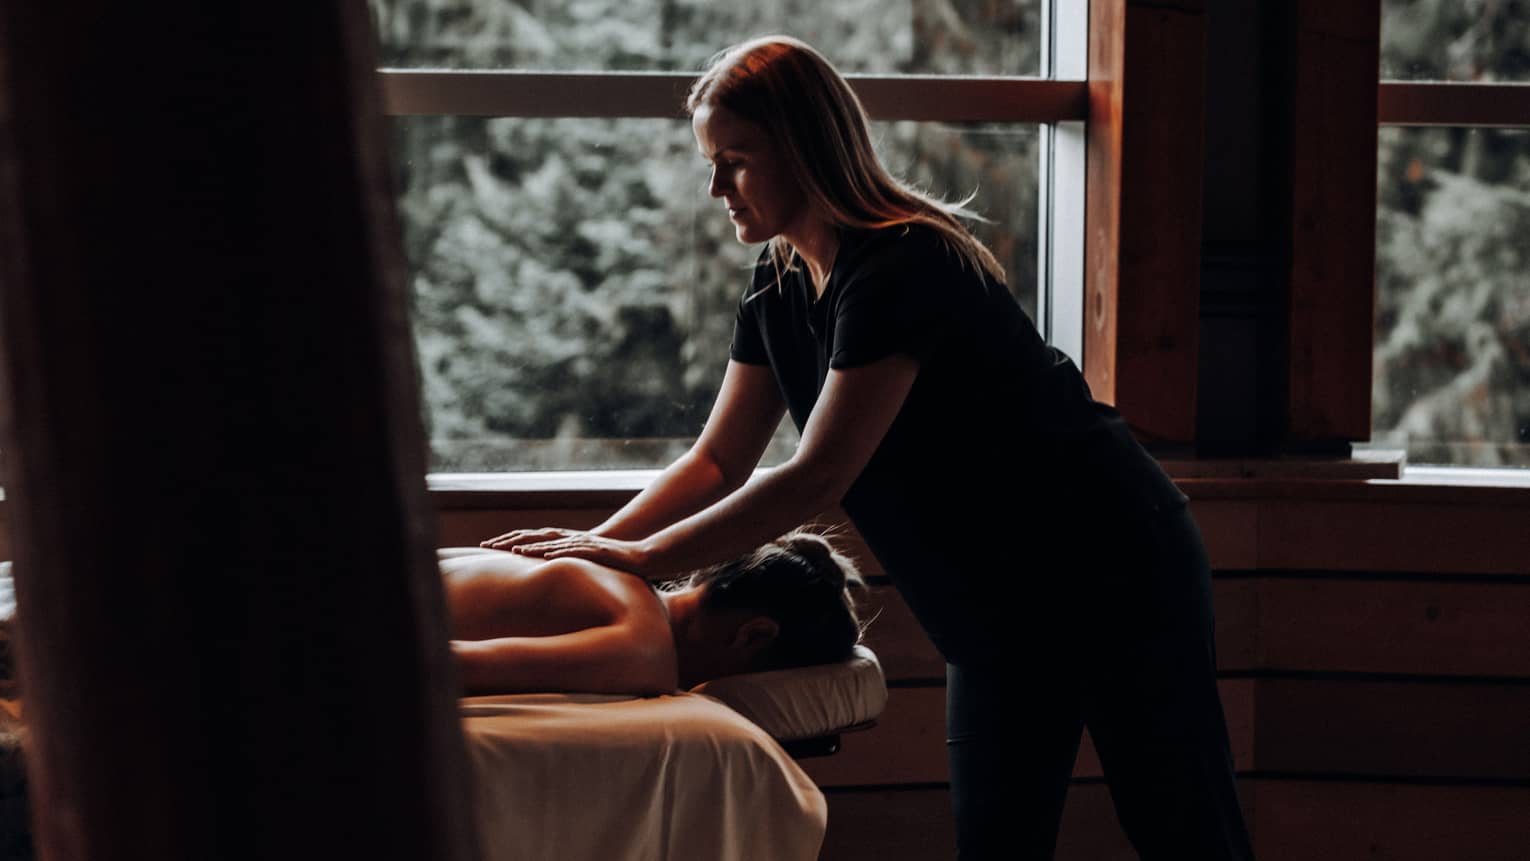 A woman receicing a massage in a dimly lit room.